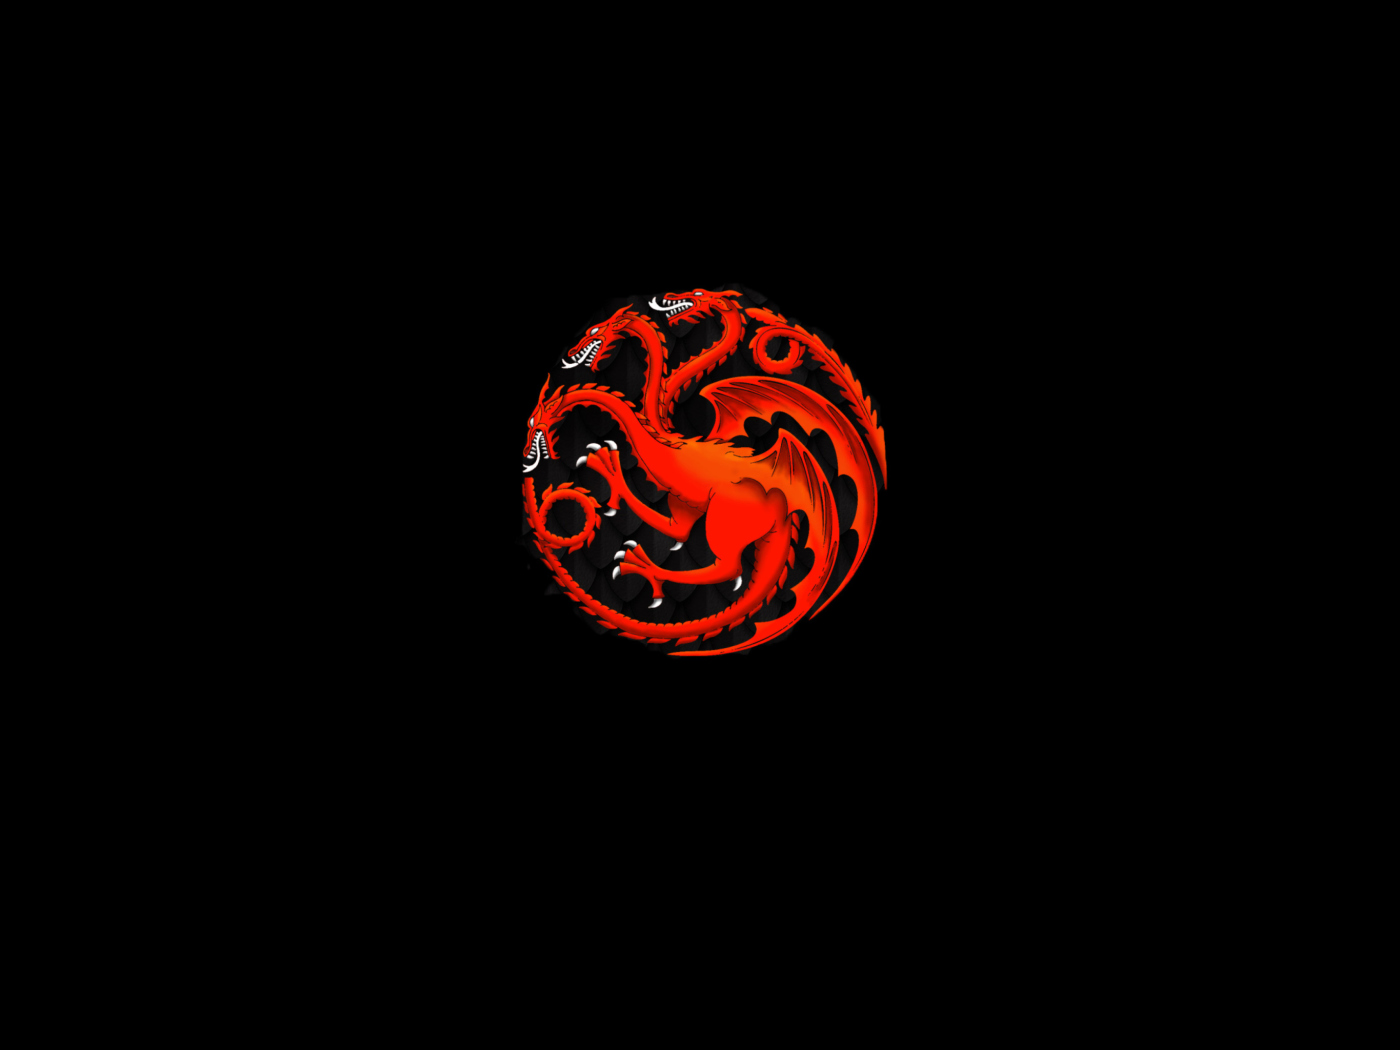 Fire And Blood Dragon wallpaper 1400x1050